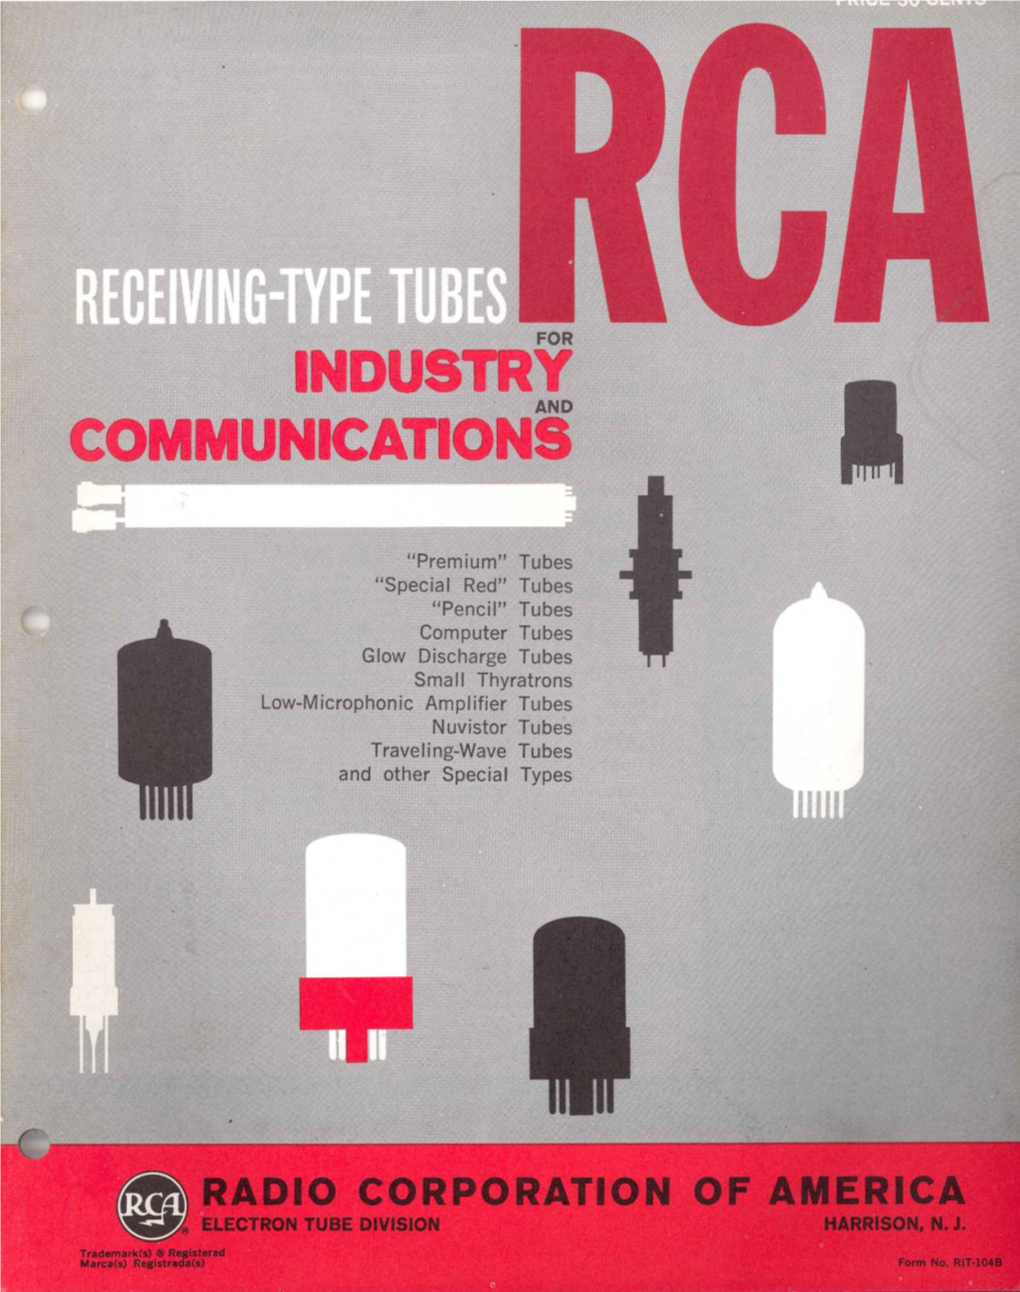 Industry Communications